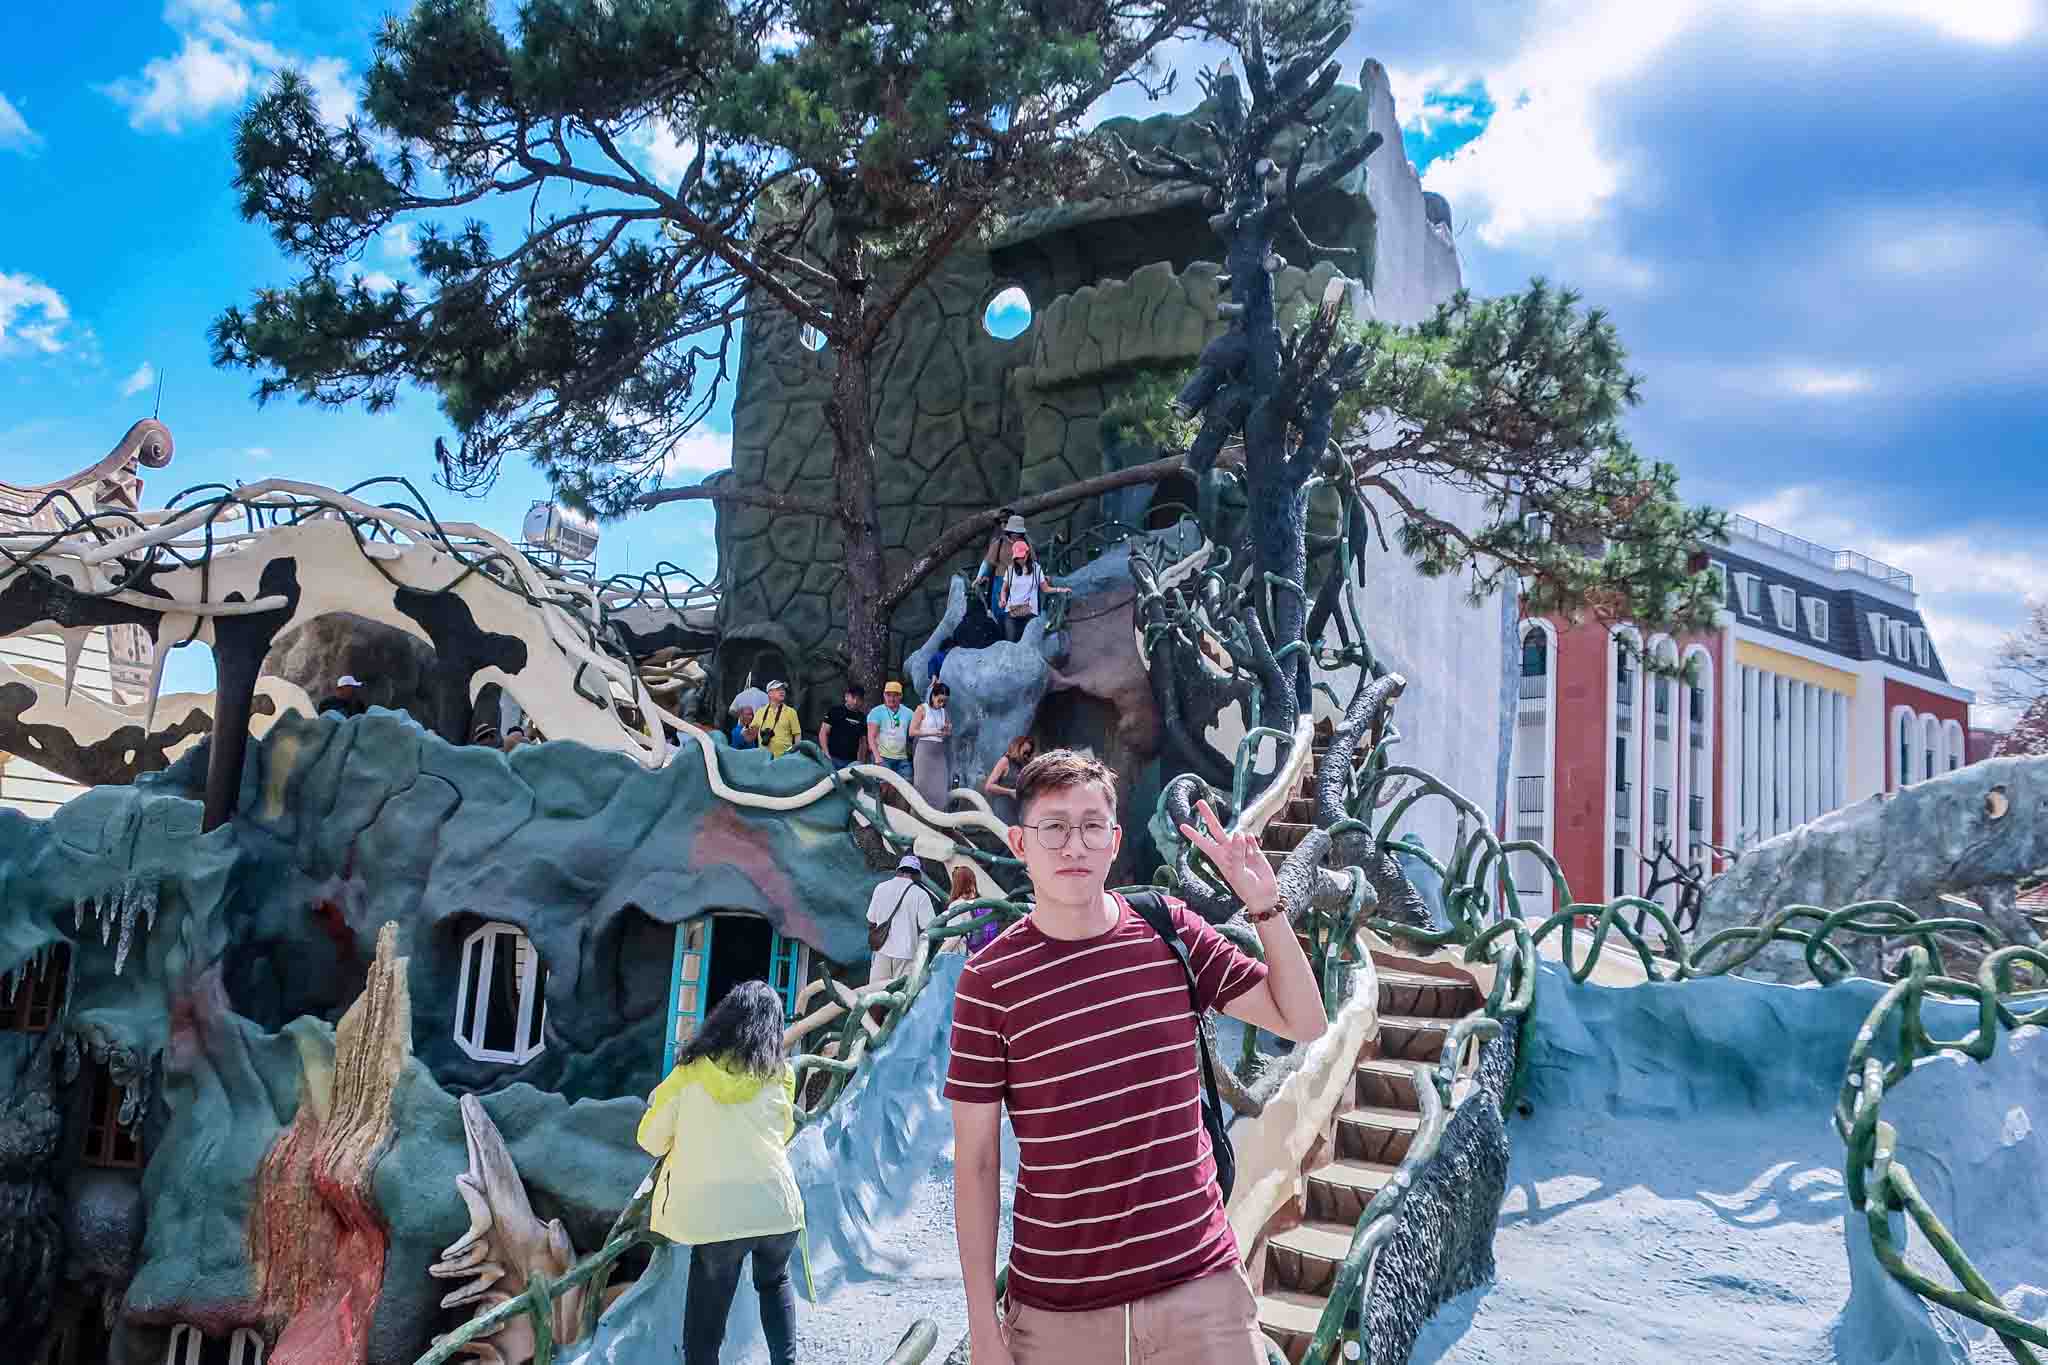 Crazy House Dalat Review